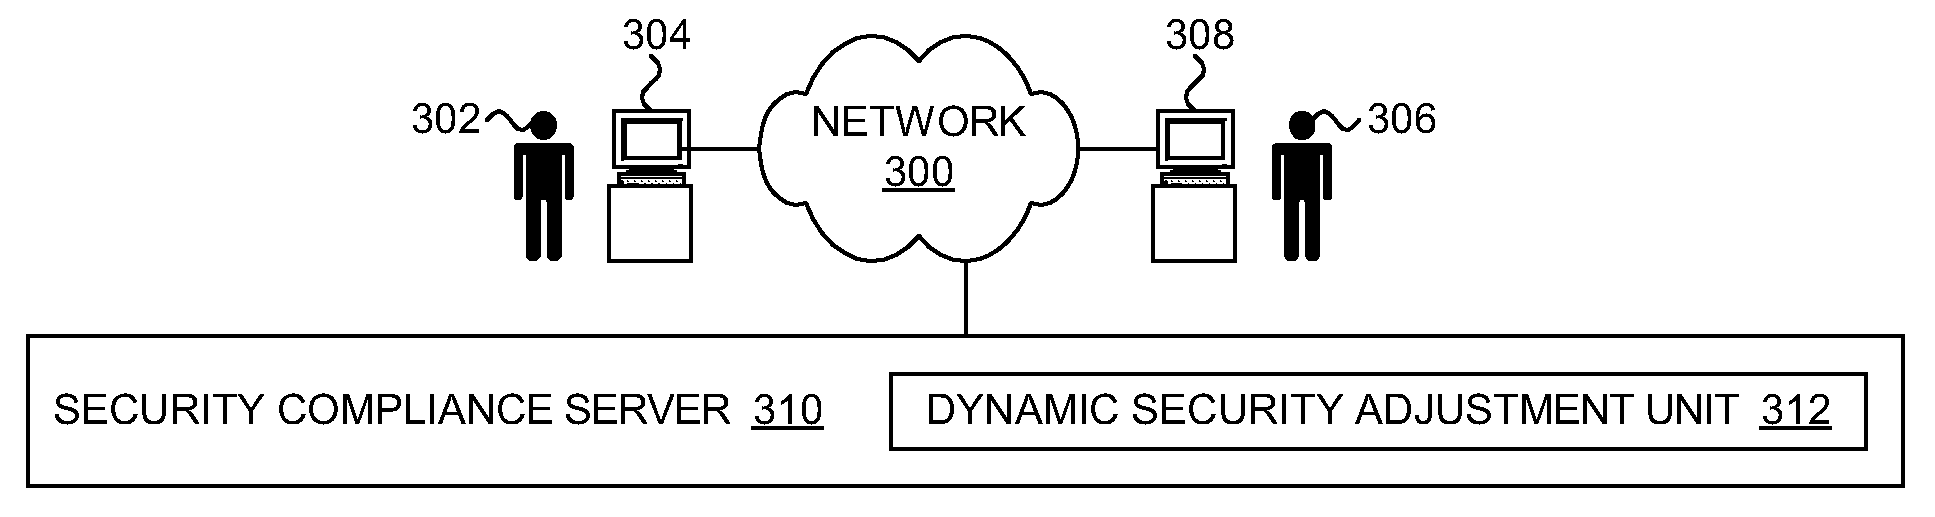 Method and System For Dynamic Adjustment of Computer Security Based on Network Activity of Users